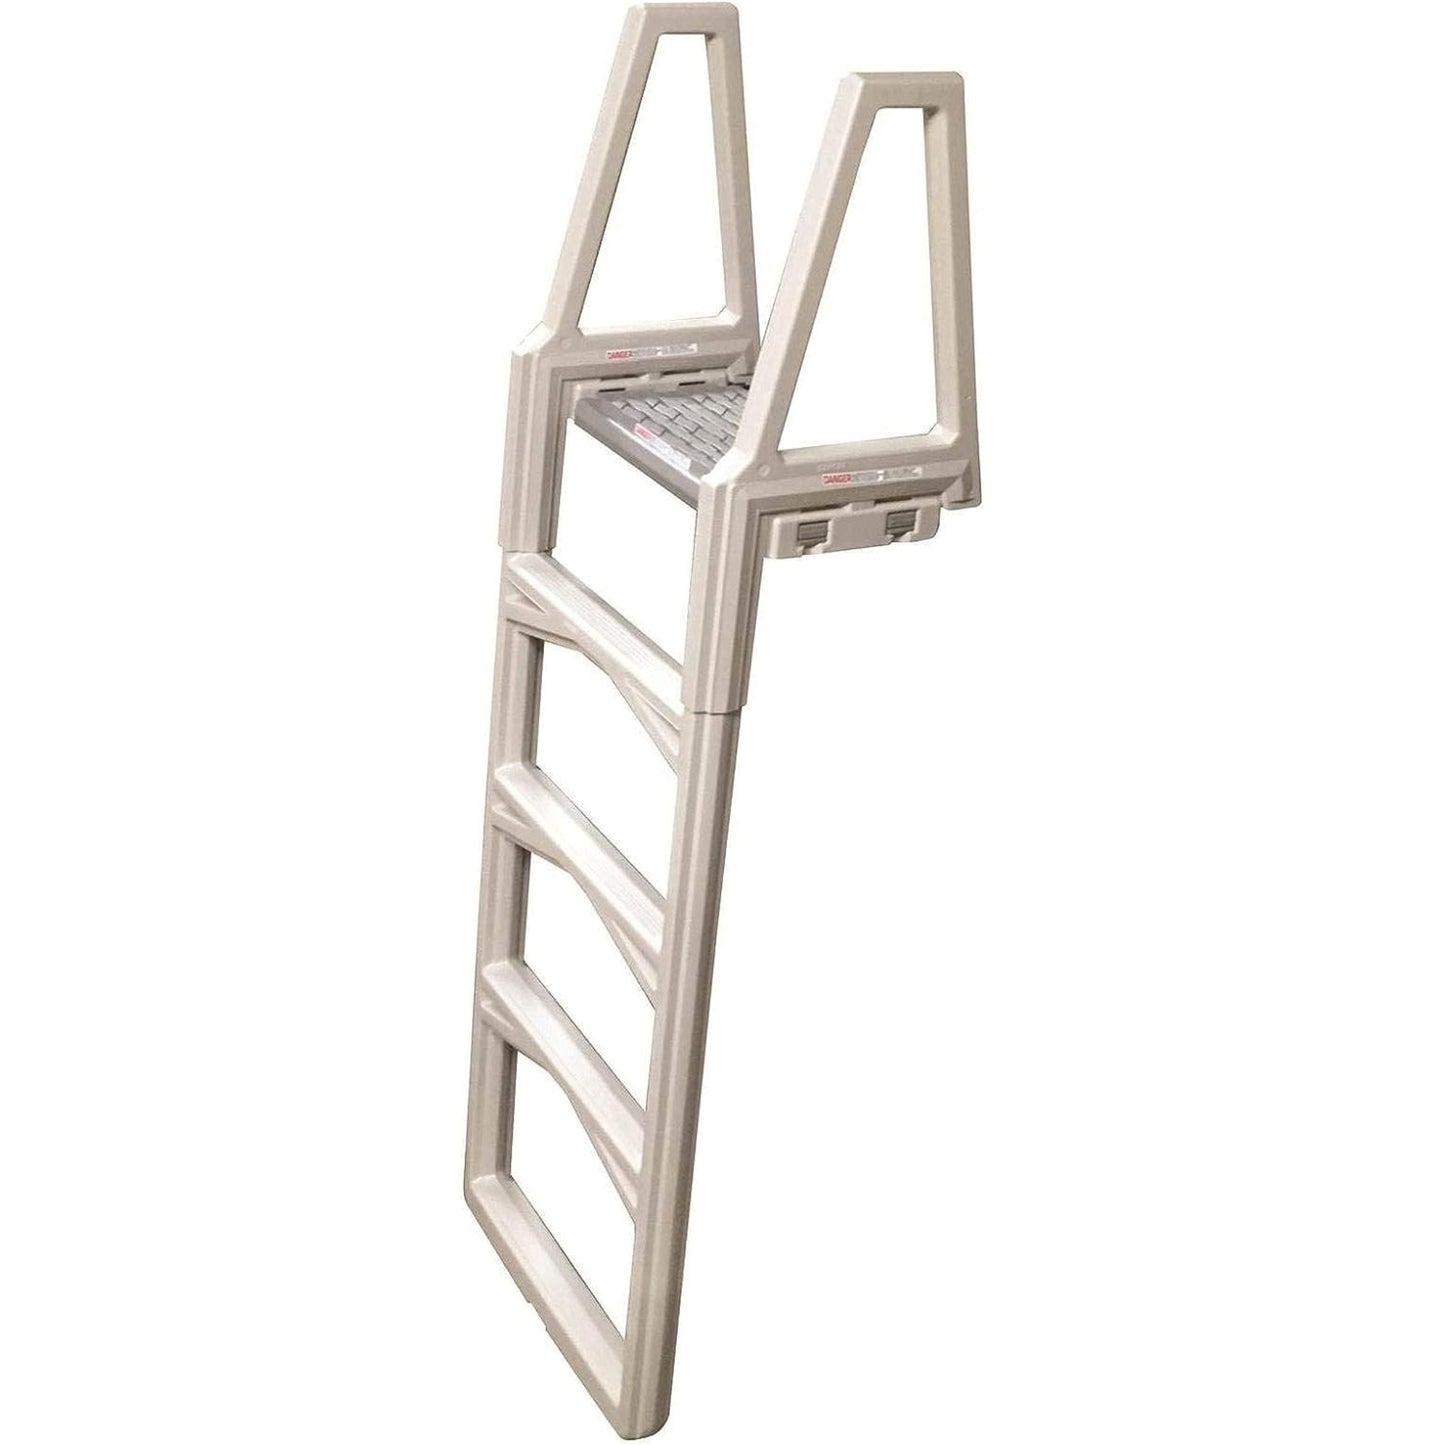 Confer Plastics Sturdy 46 to 56 Inch Adjustable Above Ground Swimming Swimming Pool Ladder